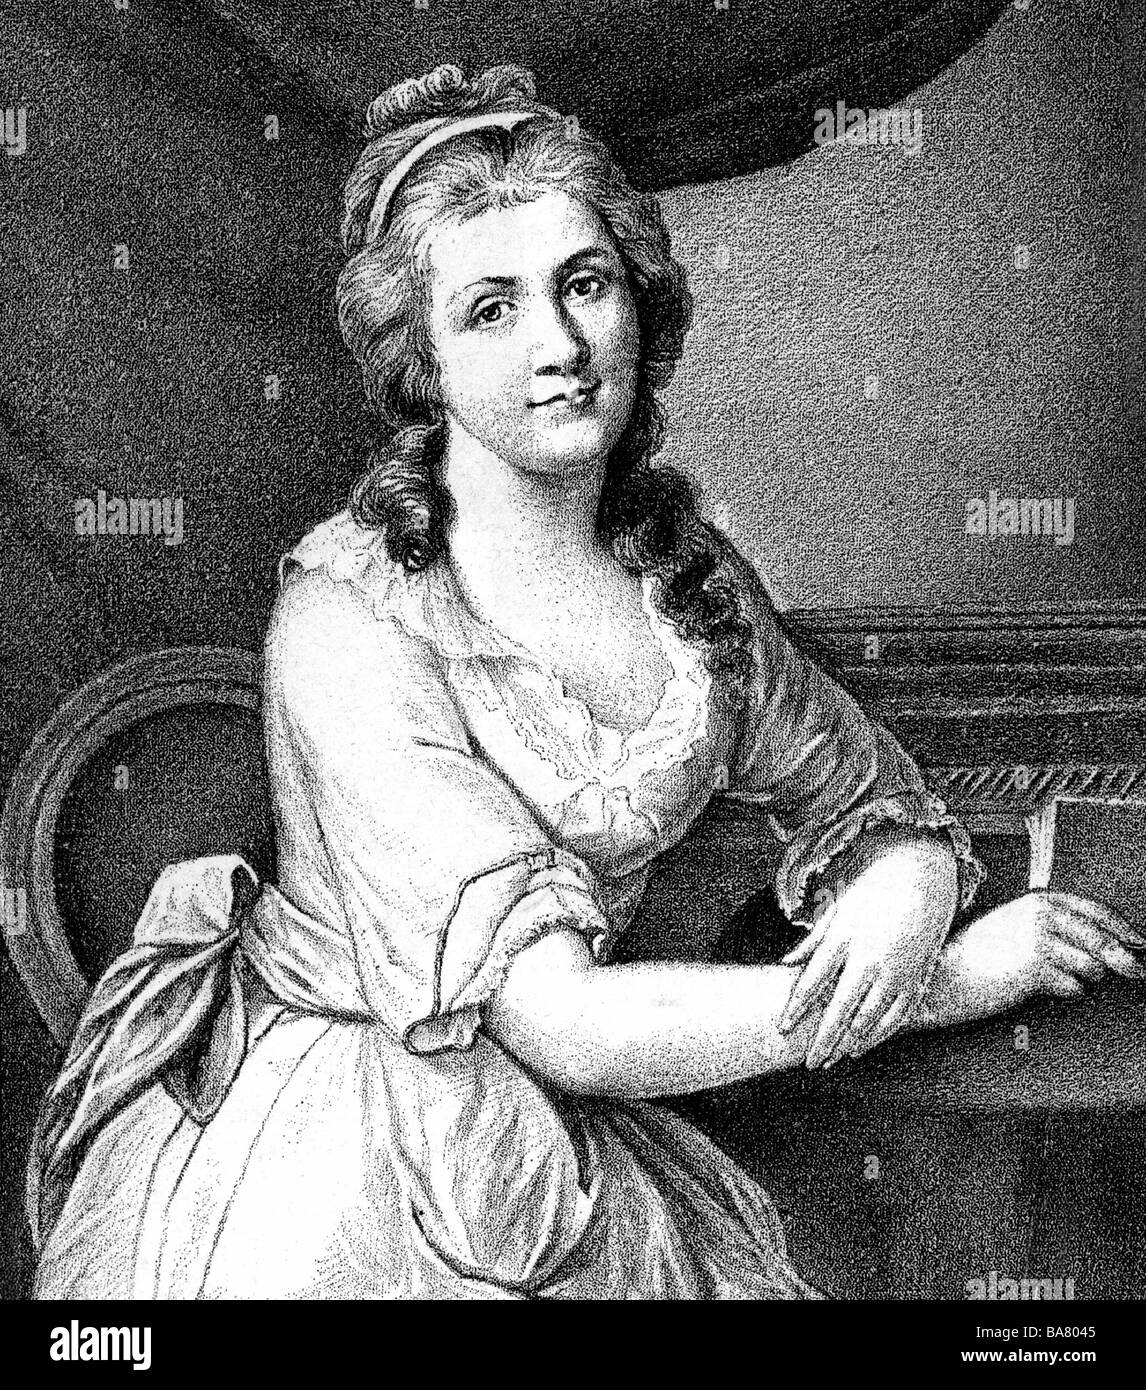 Kalb, Charlotte von, 25.7.1761 - 12.5.1843, German author / writer, half length, drawing after painting by Tischbein, 1785, Stock Photo